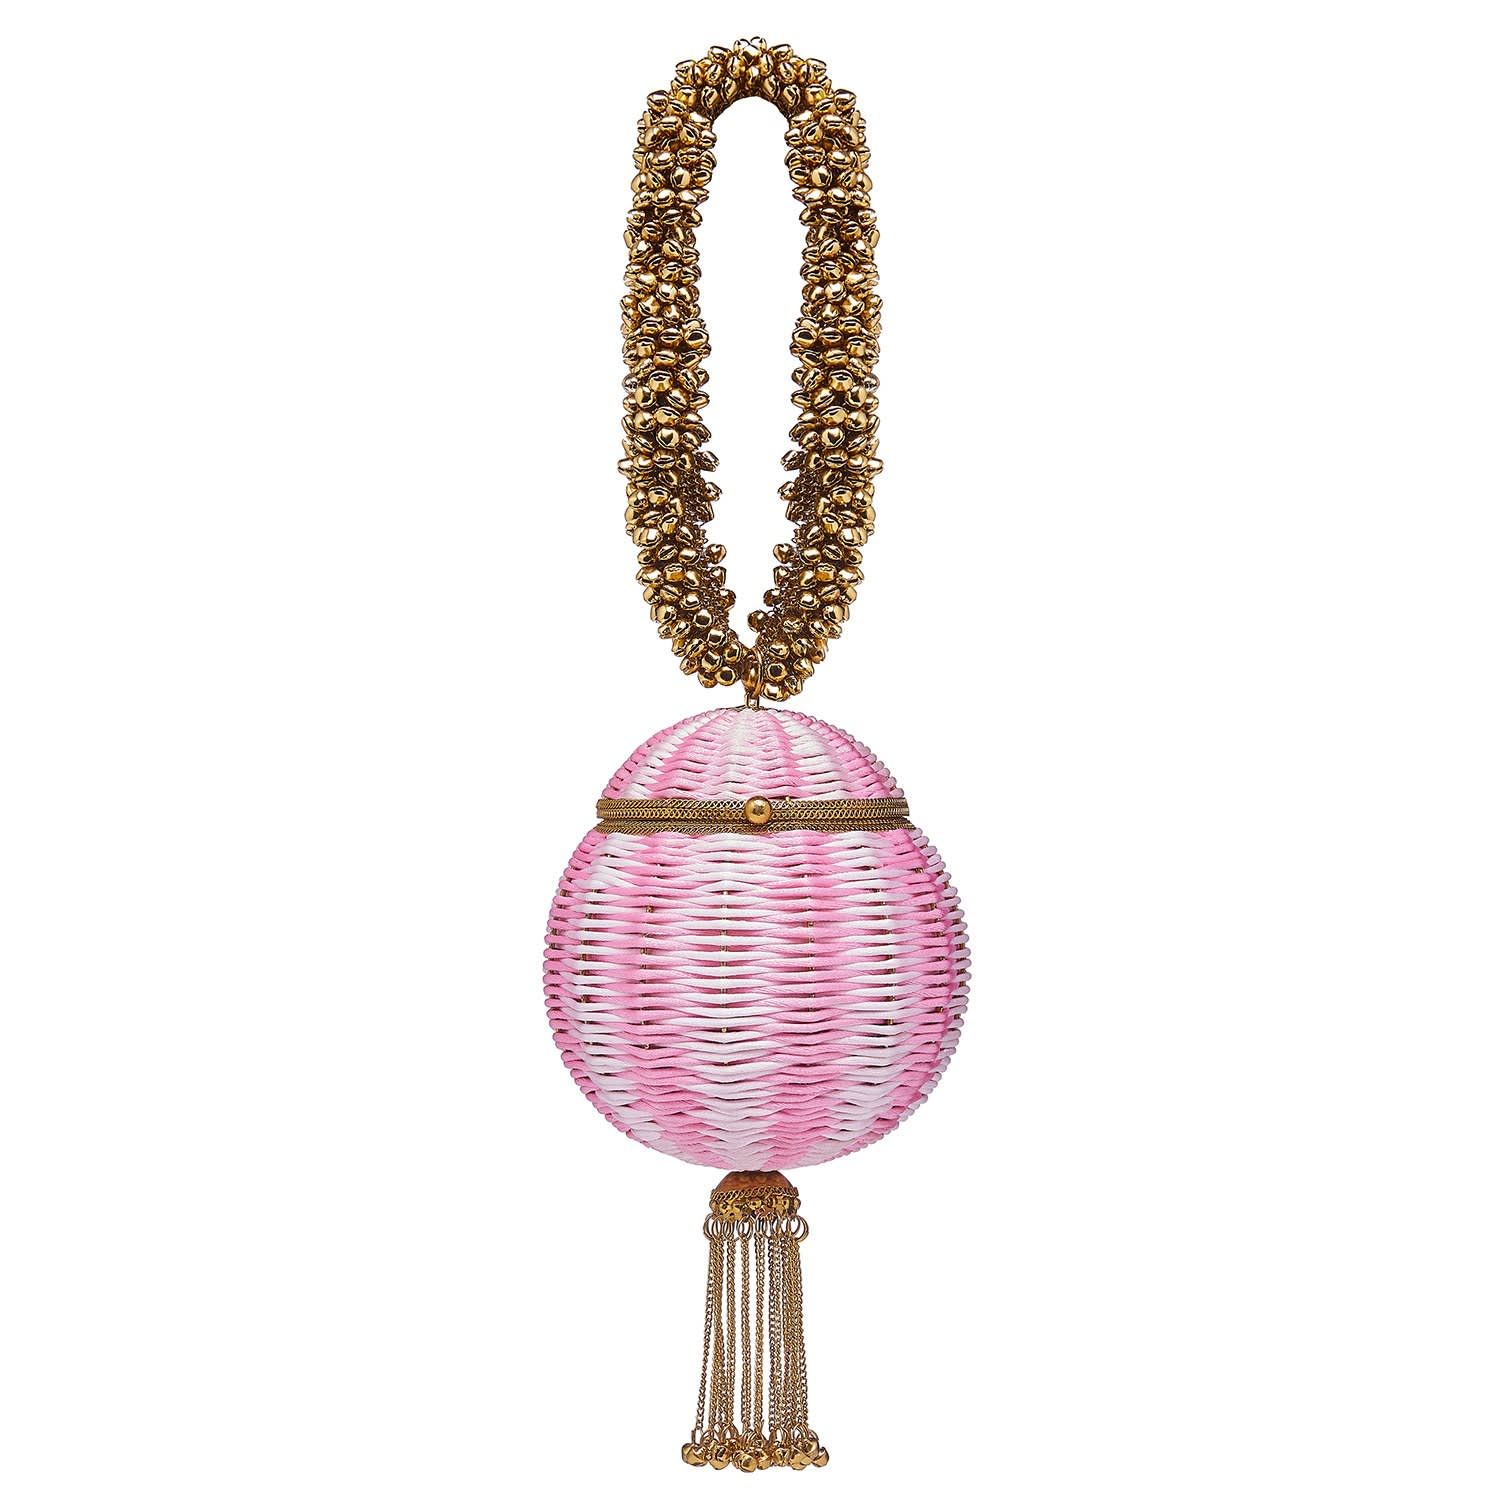 Babi Beach Beach Bracelet Clutch Bag In Powder Pink | Wolf and Badger (Global excl. US)